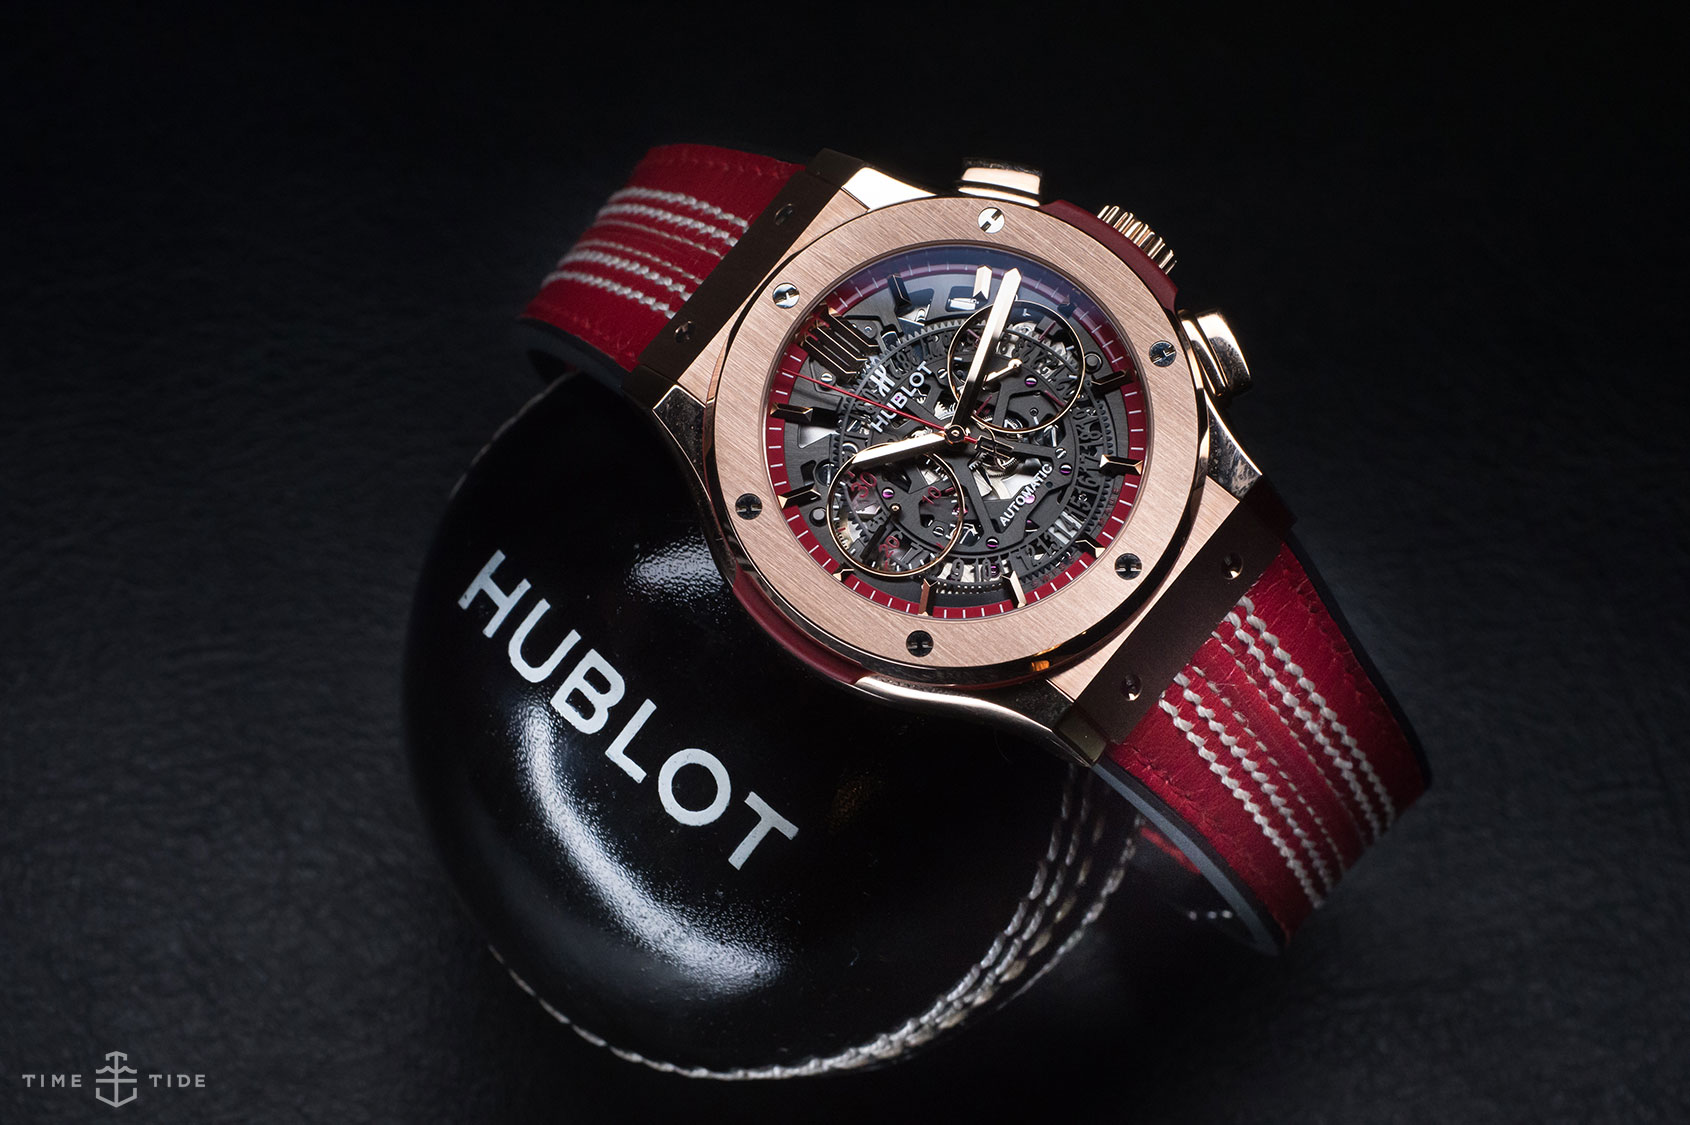 Hublot at the ICC Cricket World Cup - Event